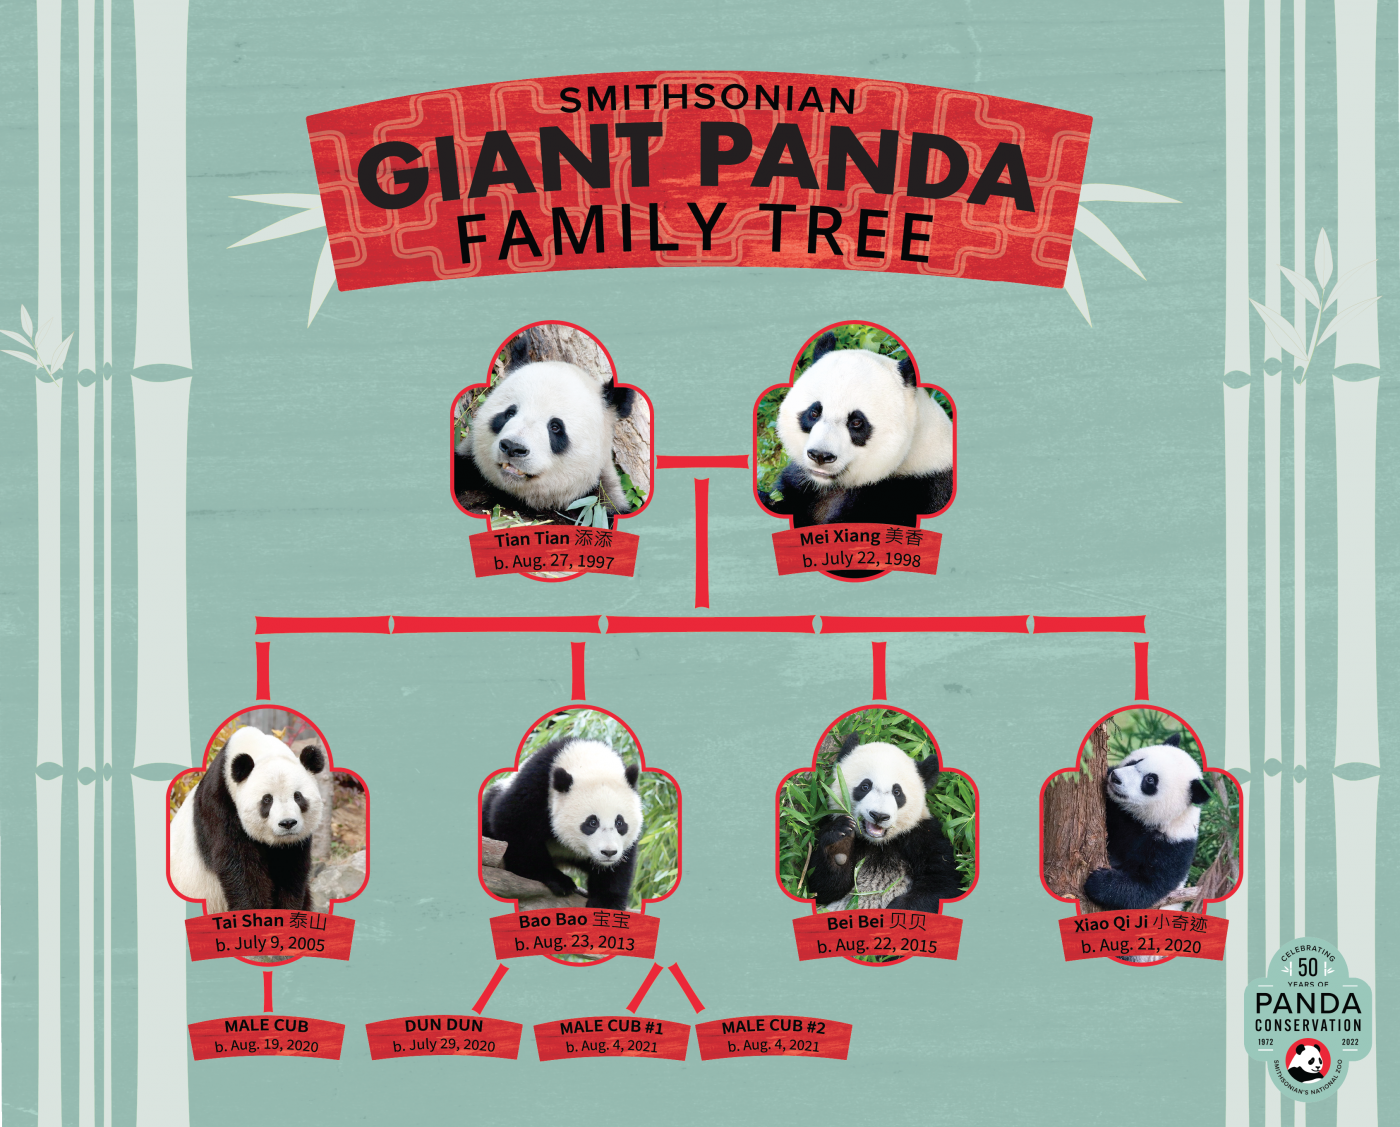 A giant panda "family tree" showing the parents and offspring of the Smithsonian's National Zoo's Giant Panda Family